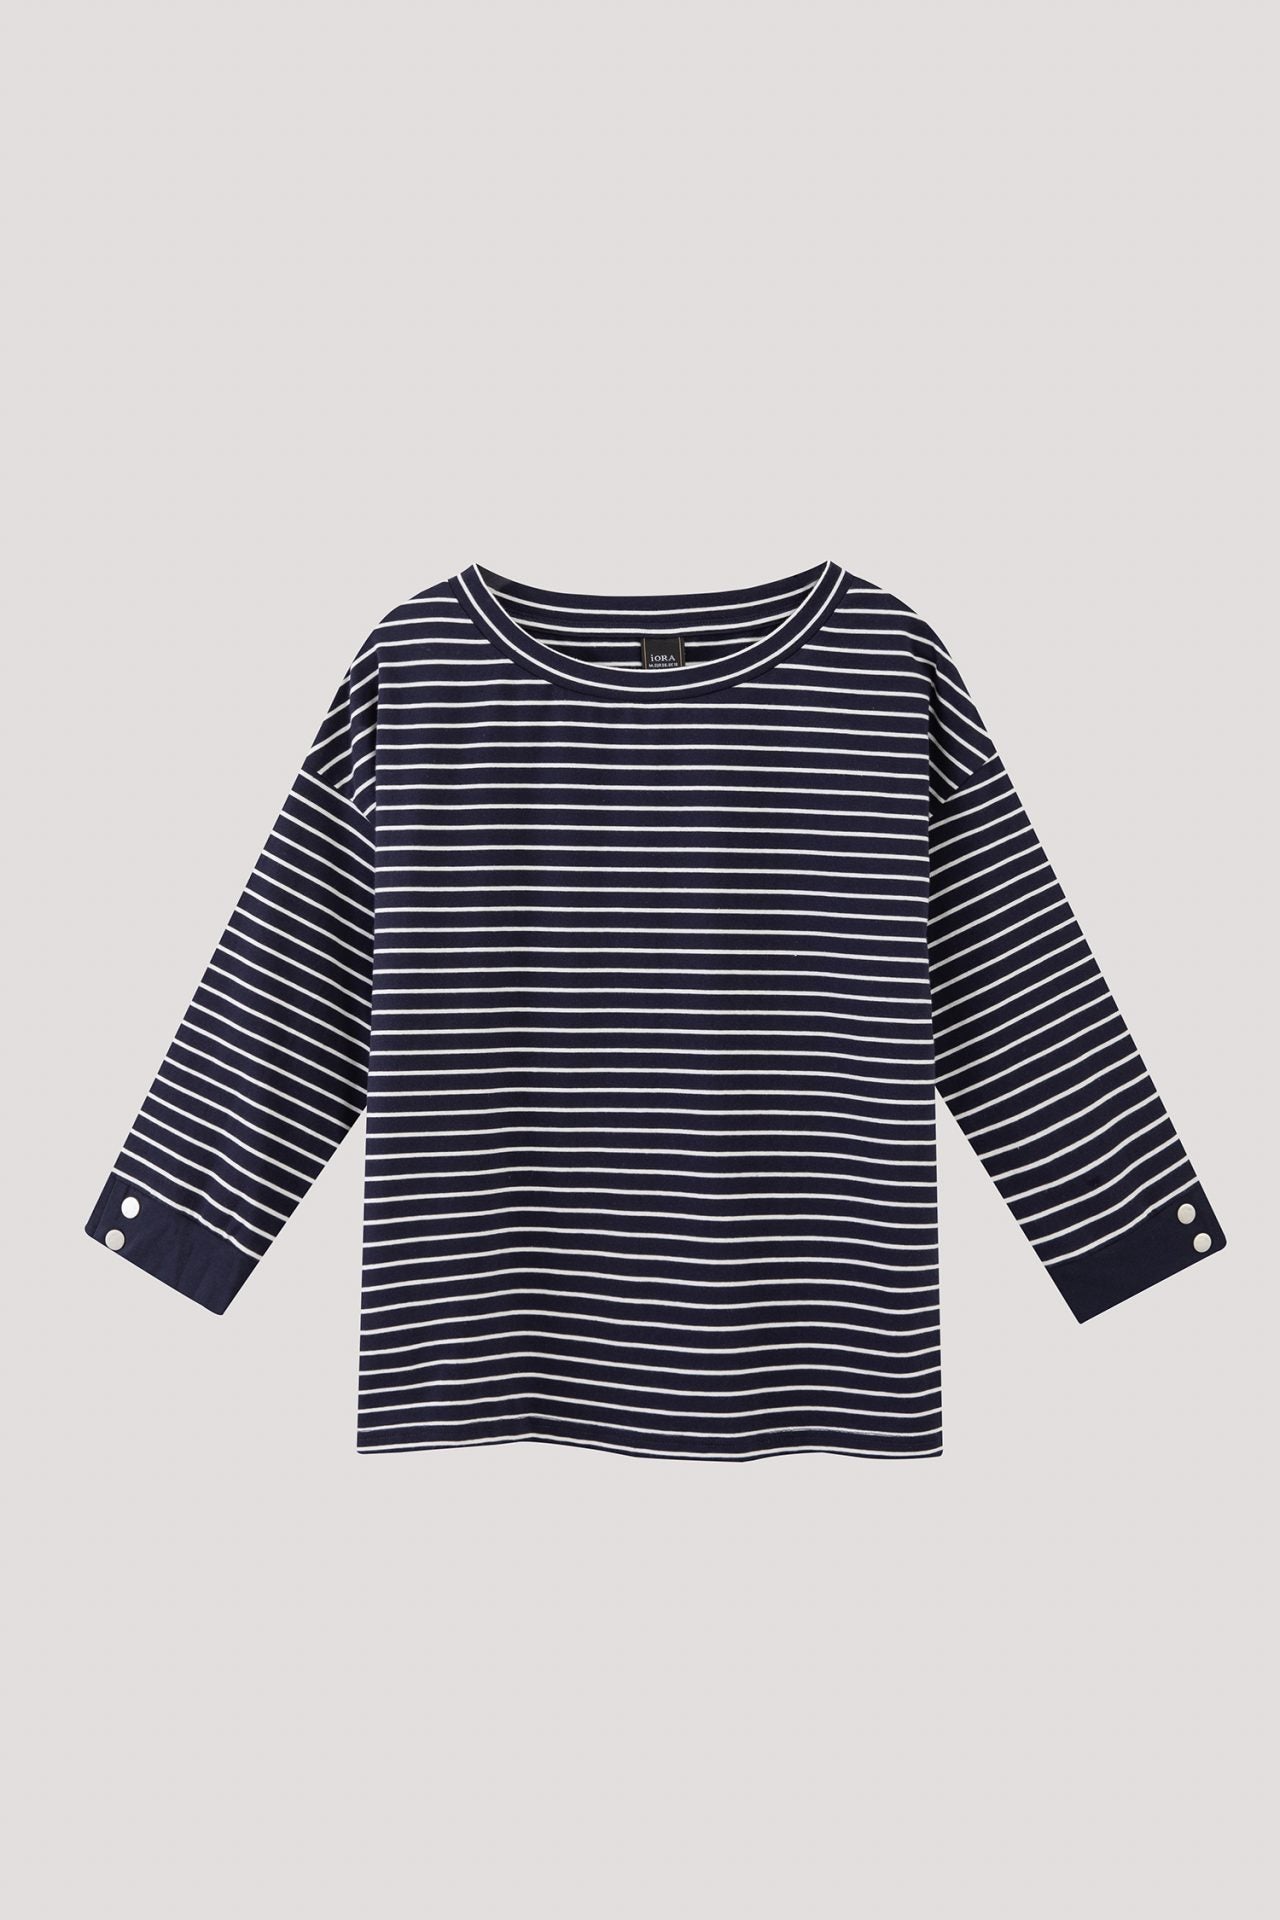 ATB 11102 STRIPED BUTTON CUFF SLEEVE TOP NAVY